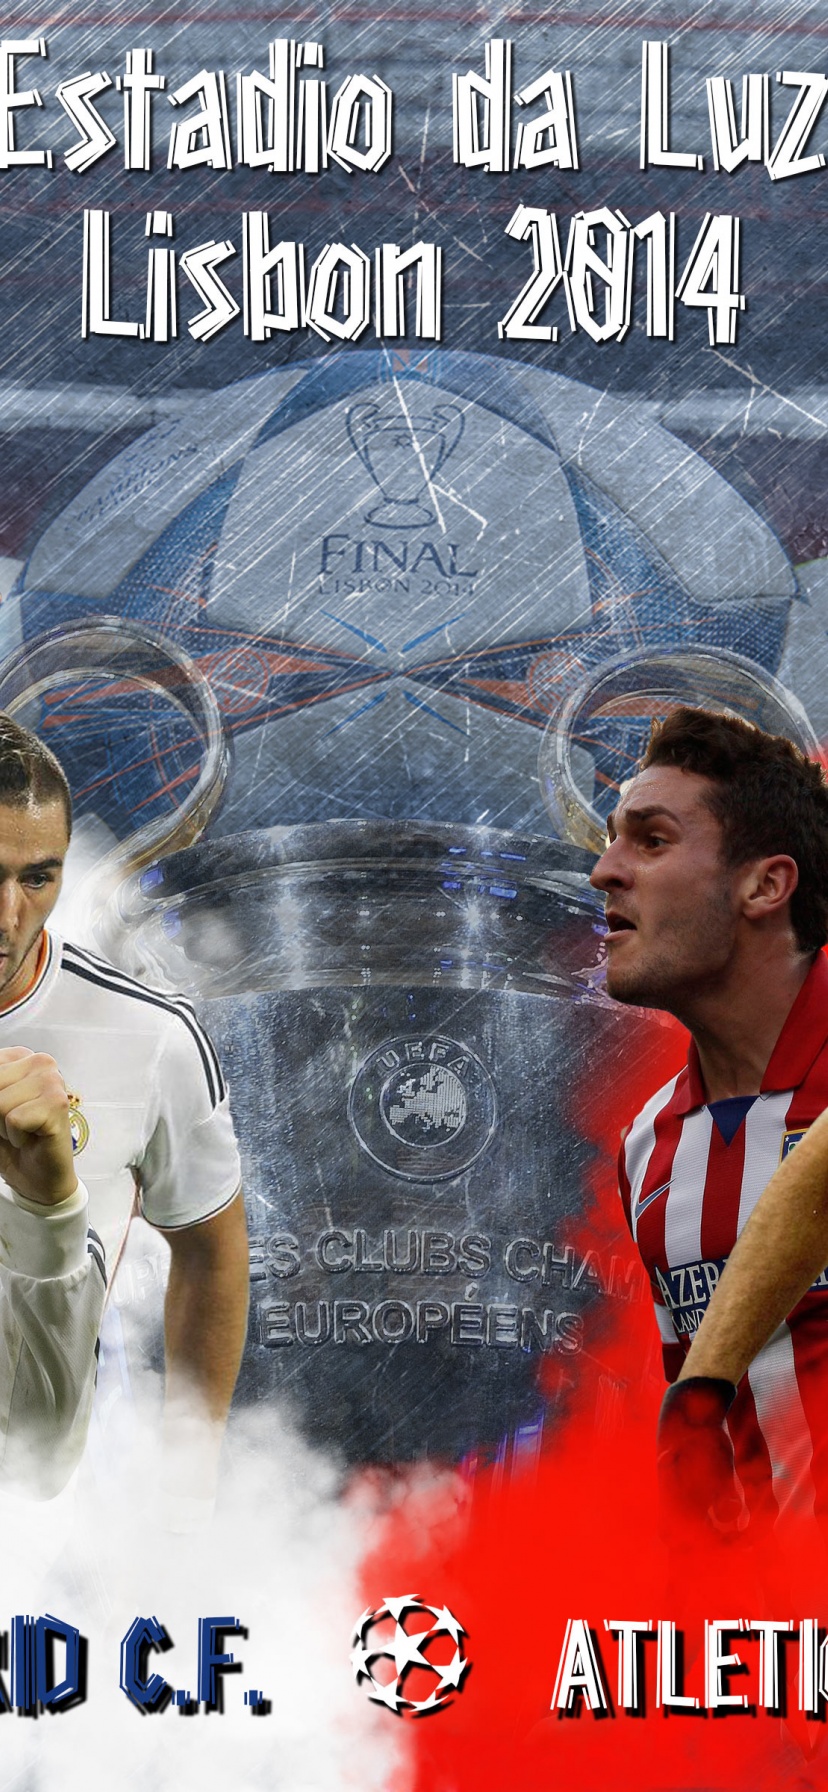 Real Madrid-Atletico Madrid CL Final